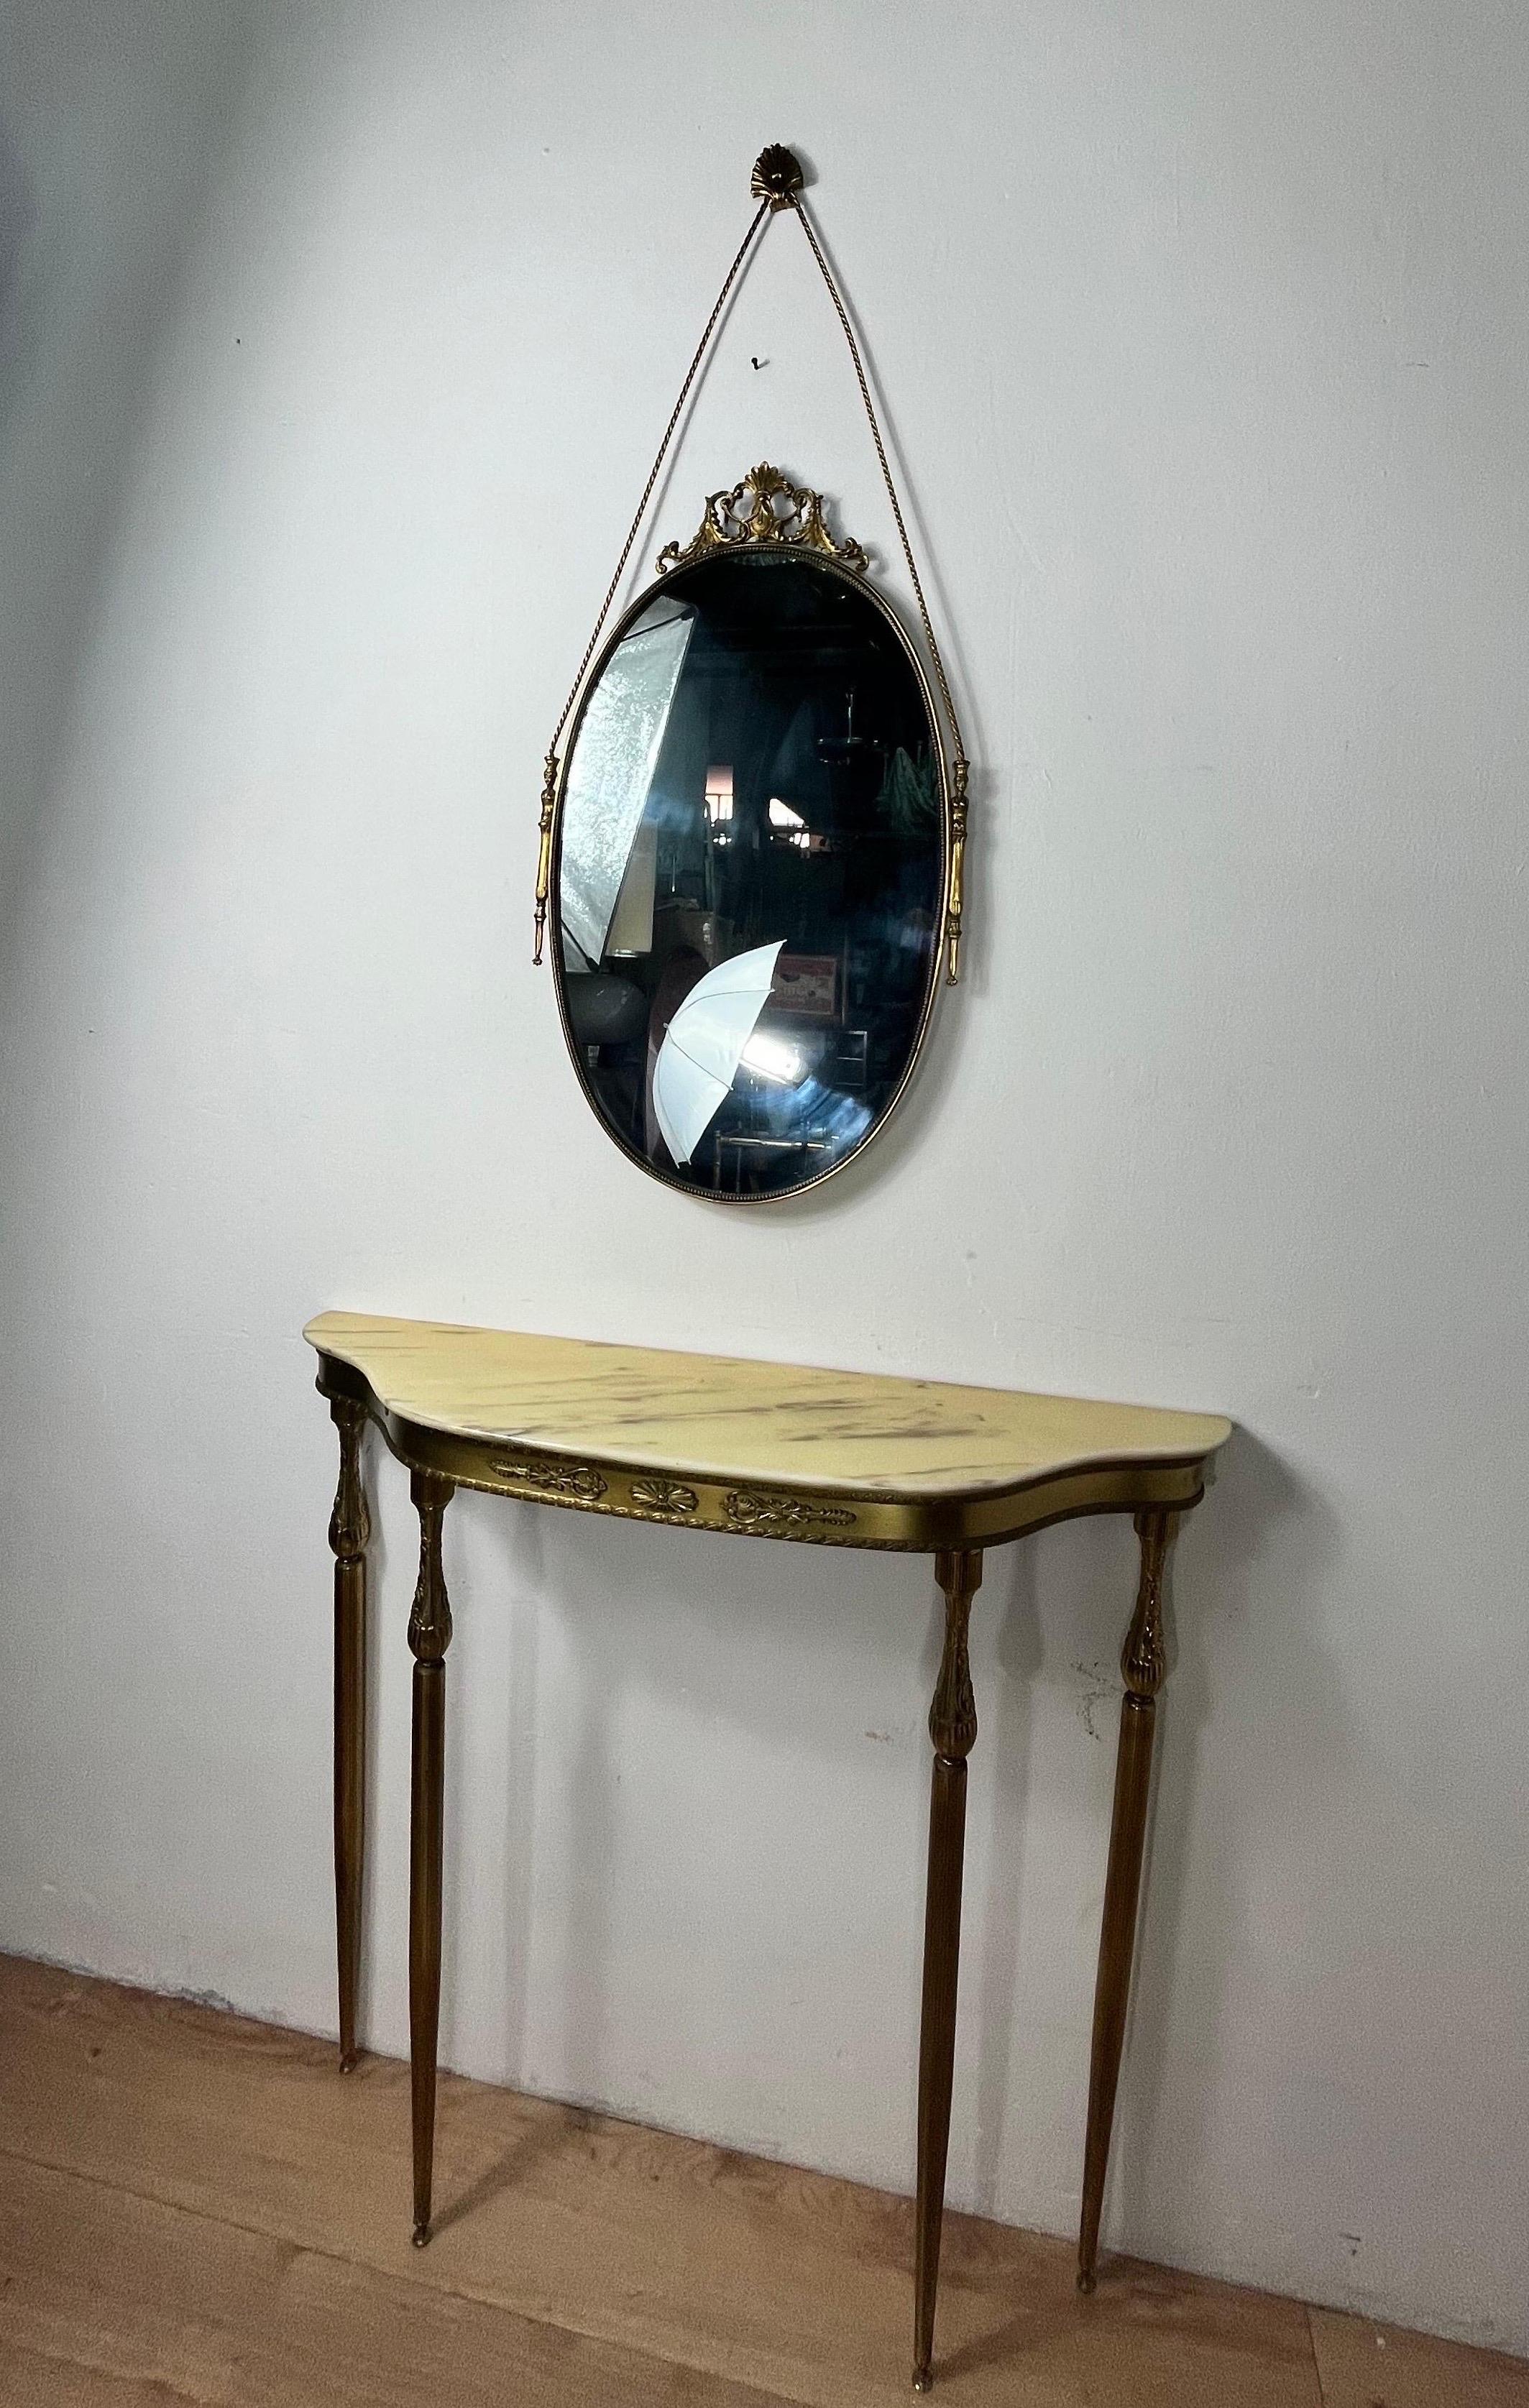 Very nice mirror with brass console and an Italian style marble surface. The dimensions of the console are 34.25 in length, 37.00 in width and 9.84 in depth. (Inches)